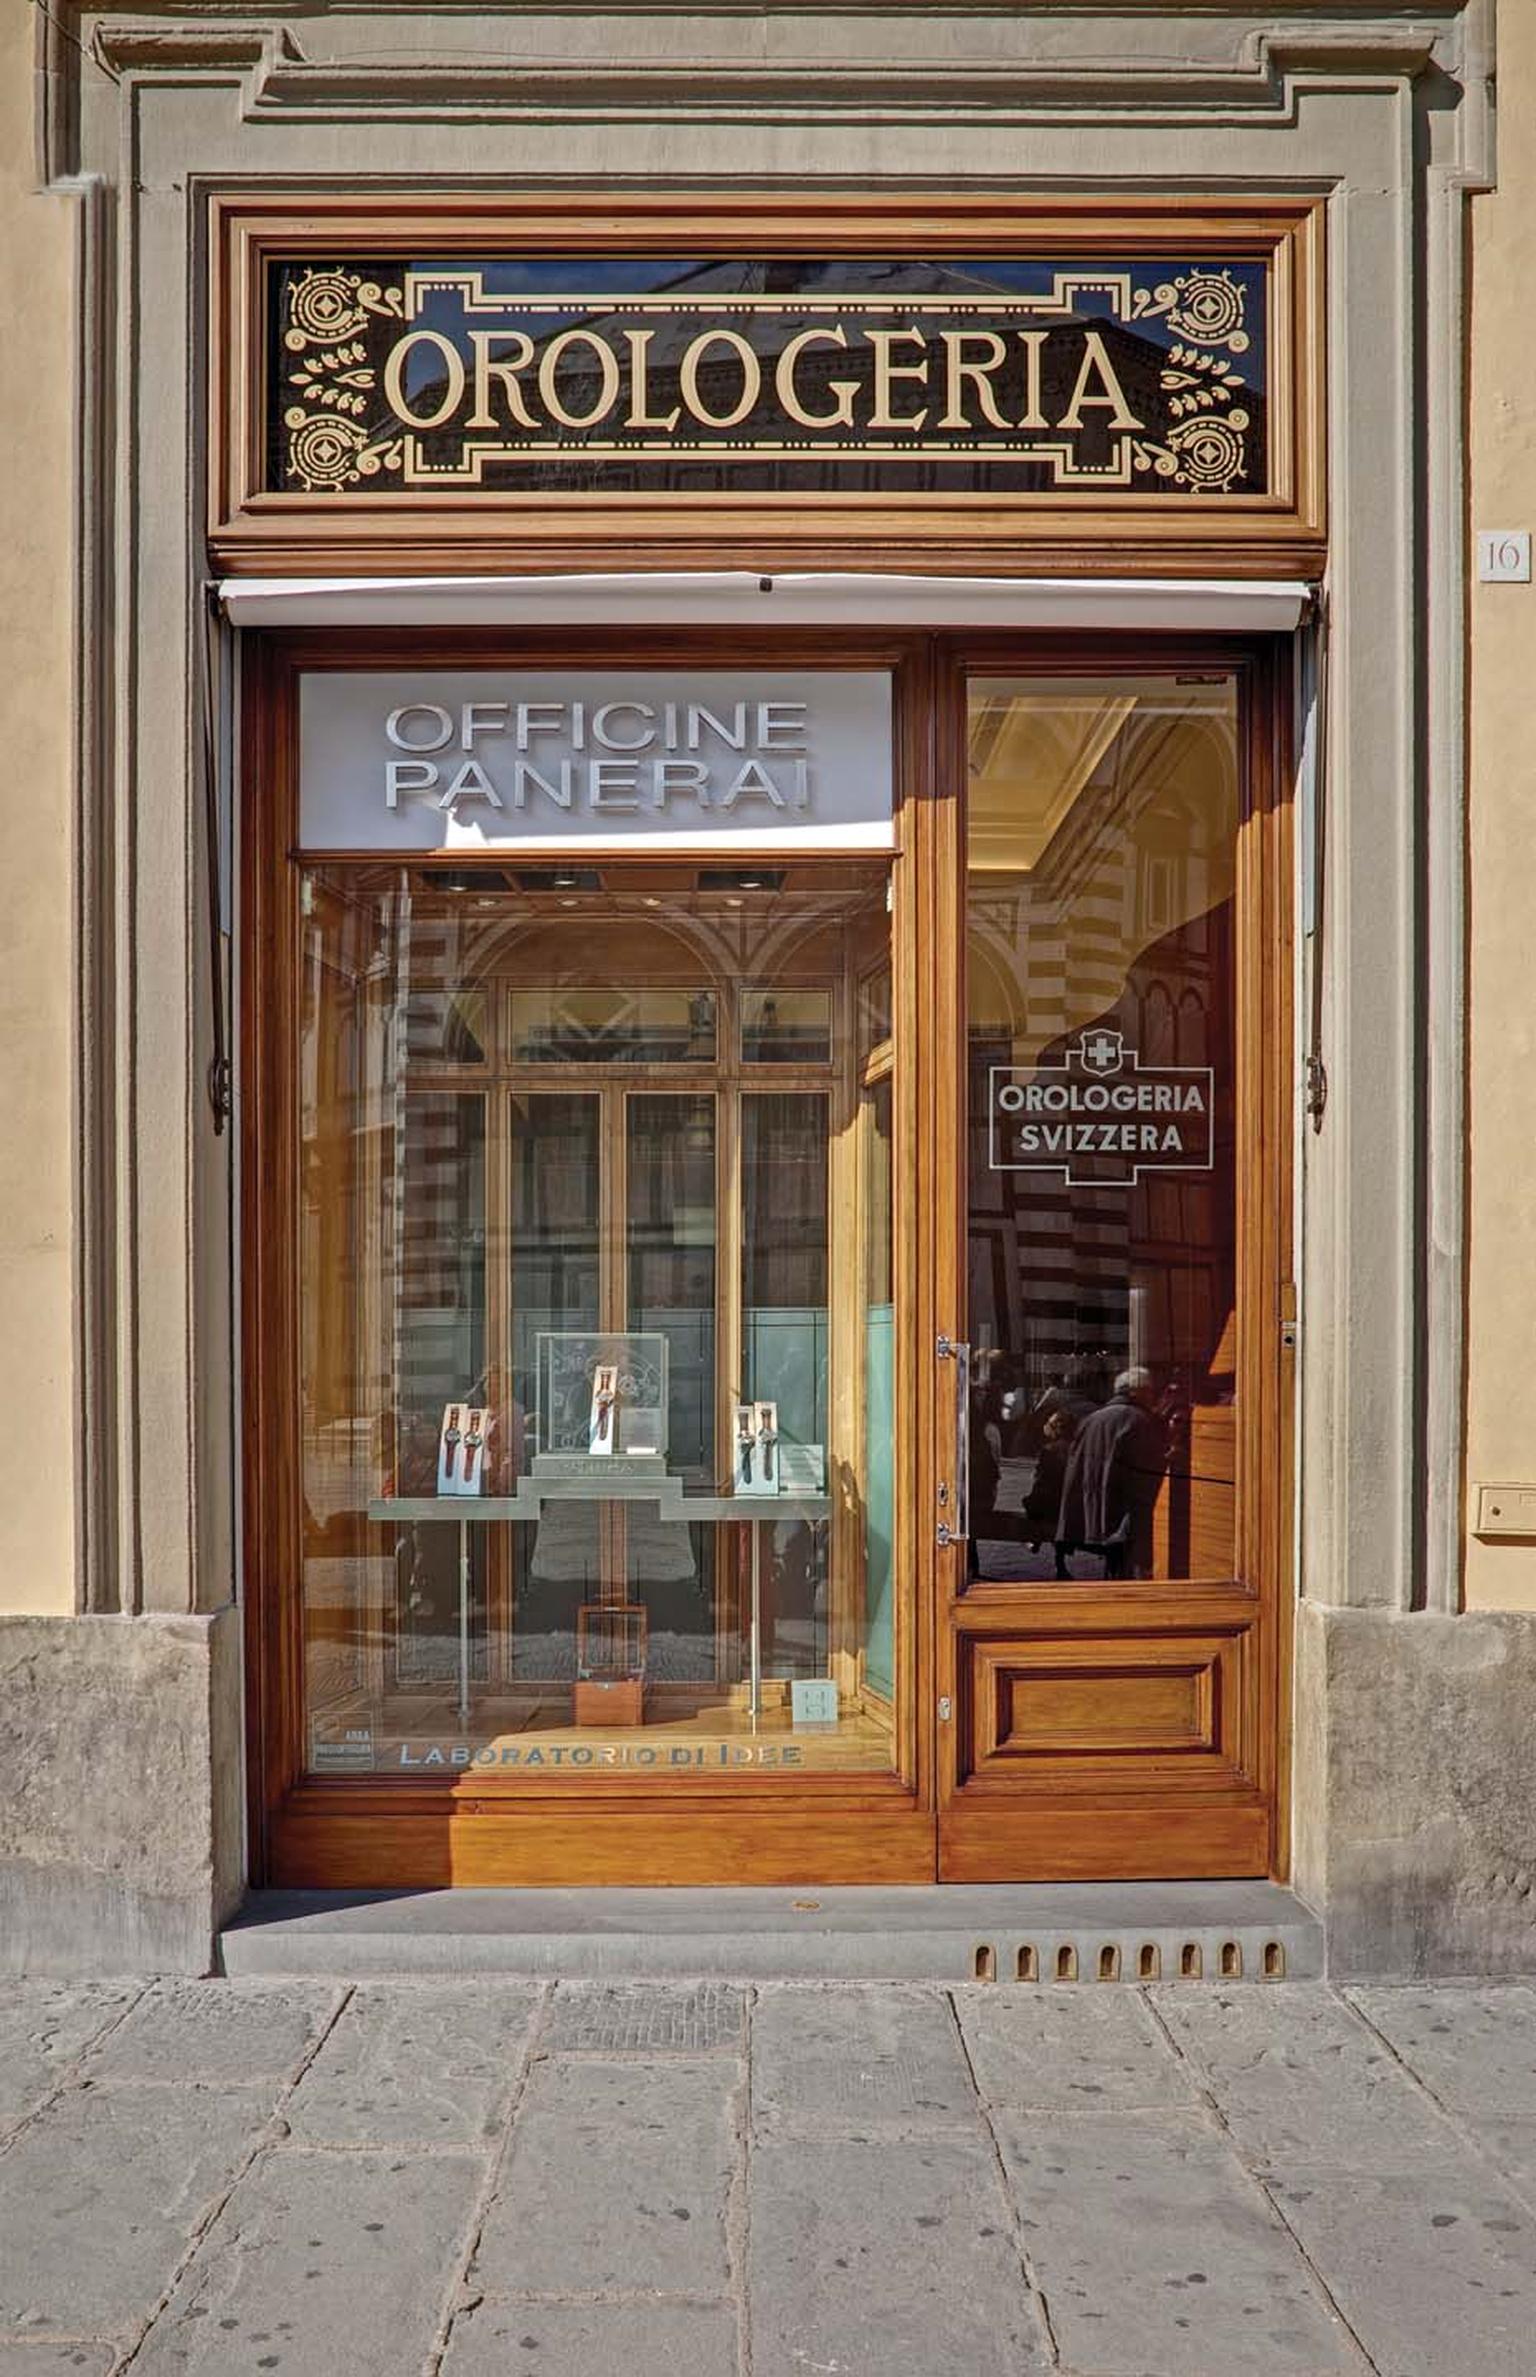 Panerai boutique in Florence today.